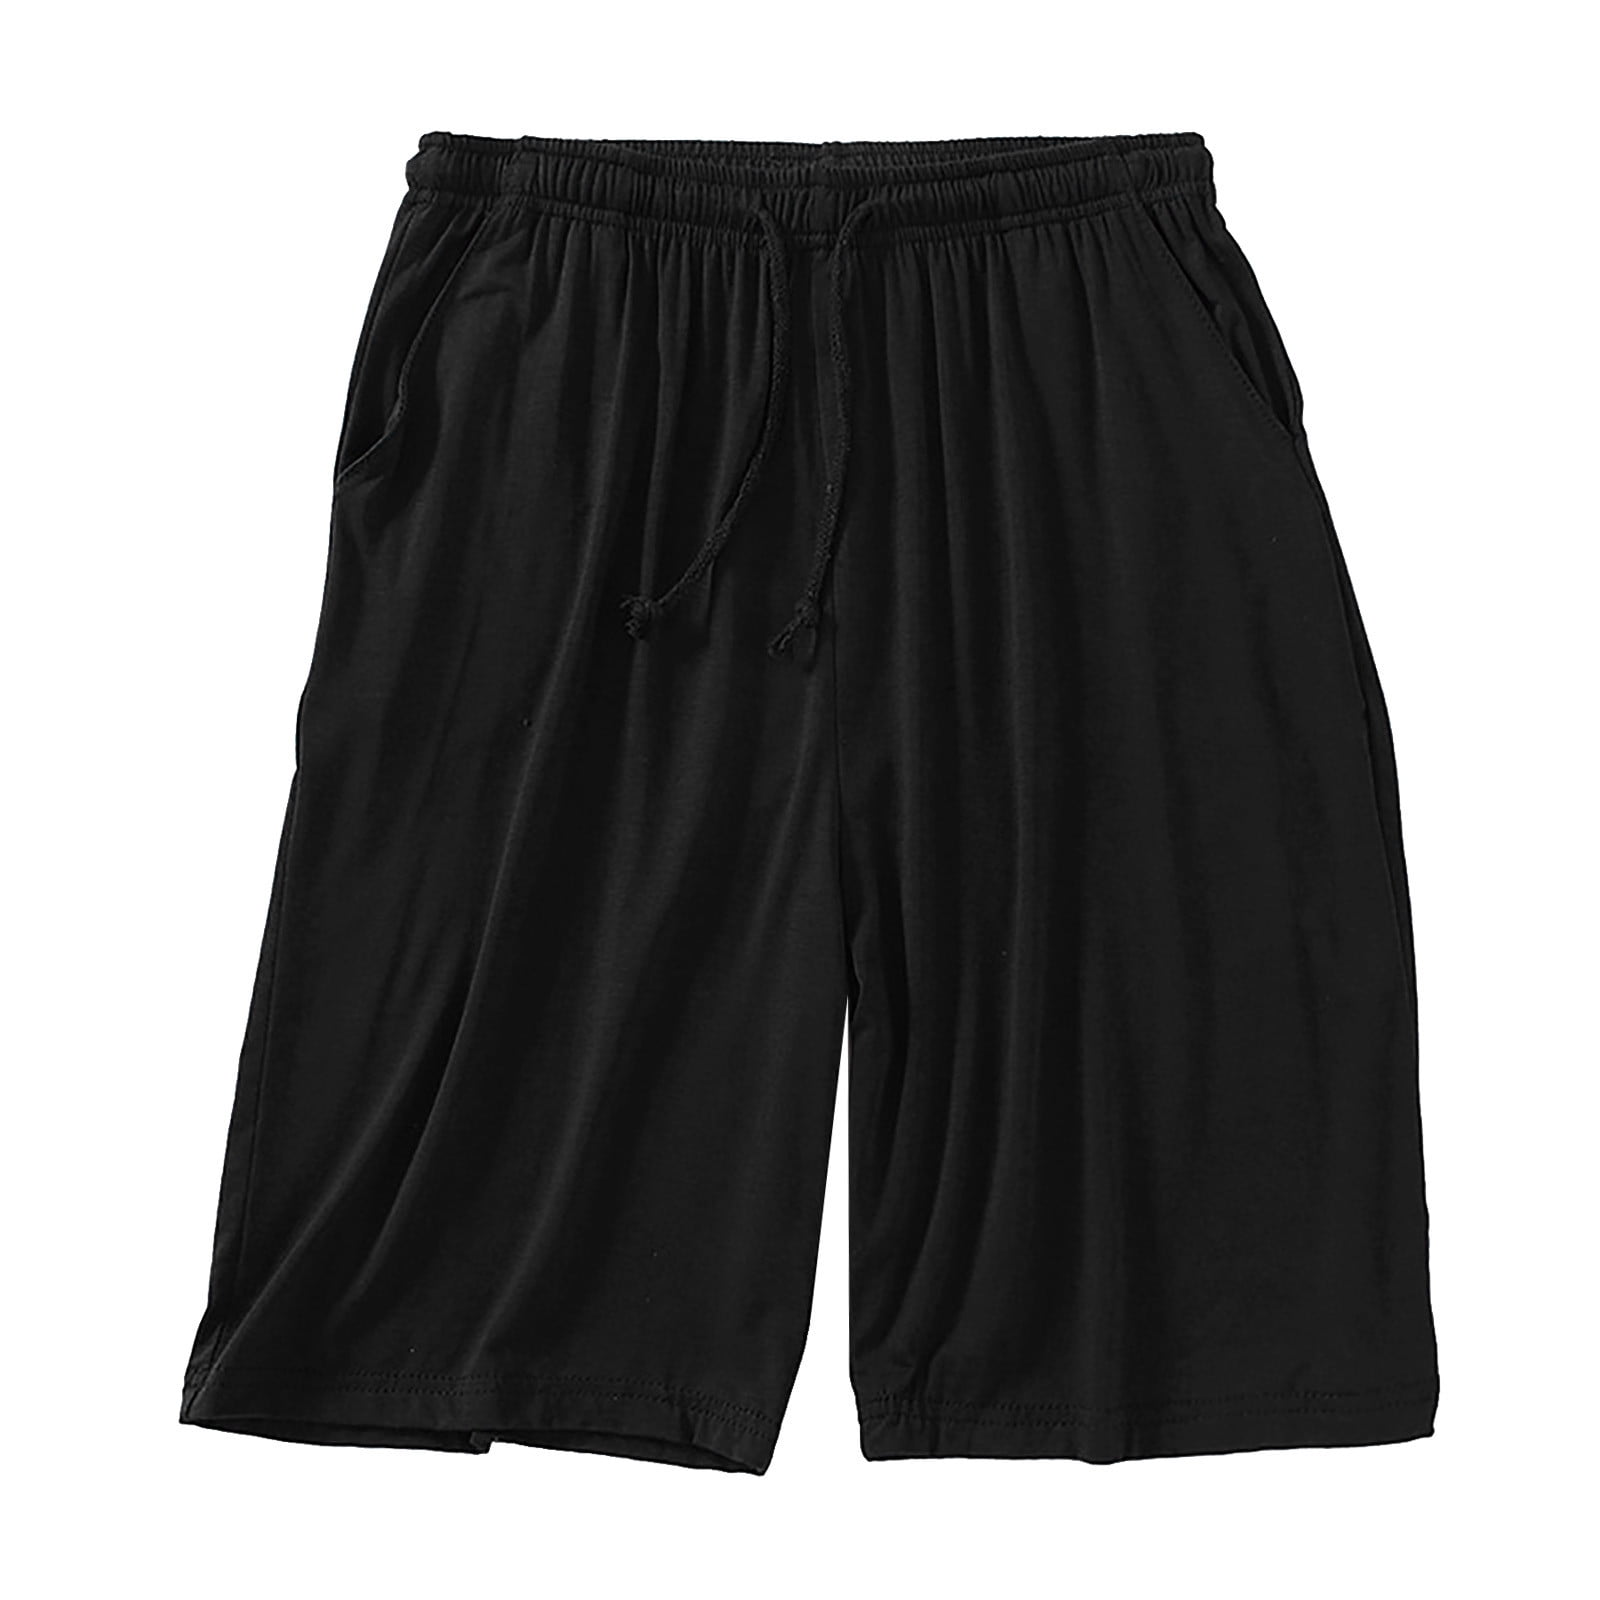 CBGELRT Men's Lightweight Quick Dry Casual Shorts Men's Casual Outdoors ...